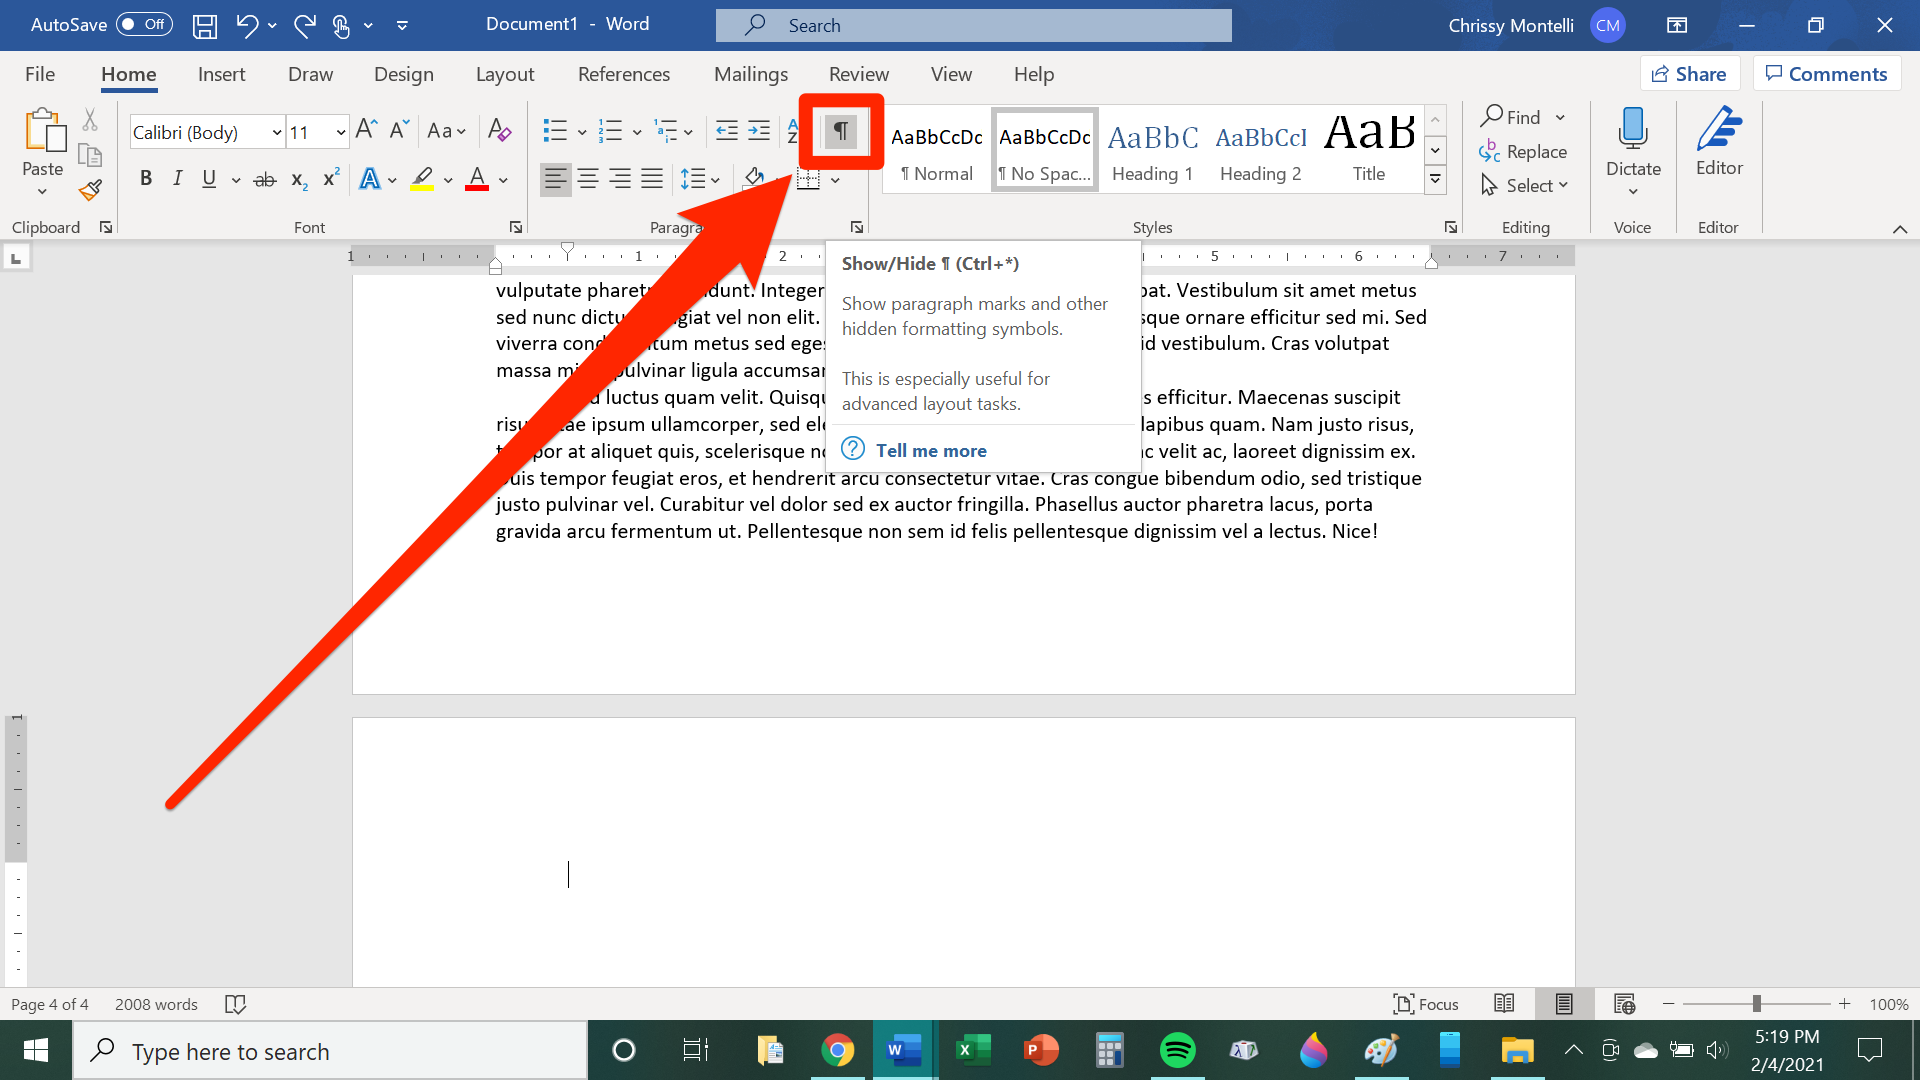 How to delete a page in Microsoft Word, even if you can't delete any